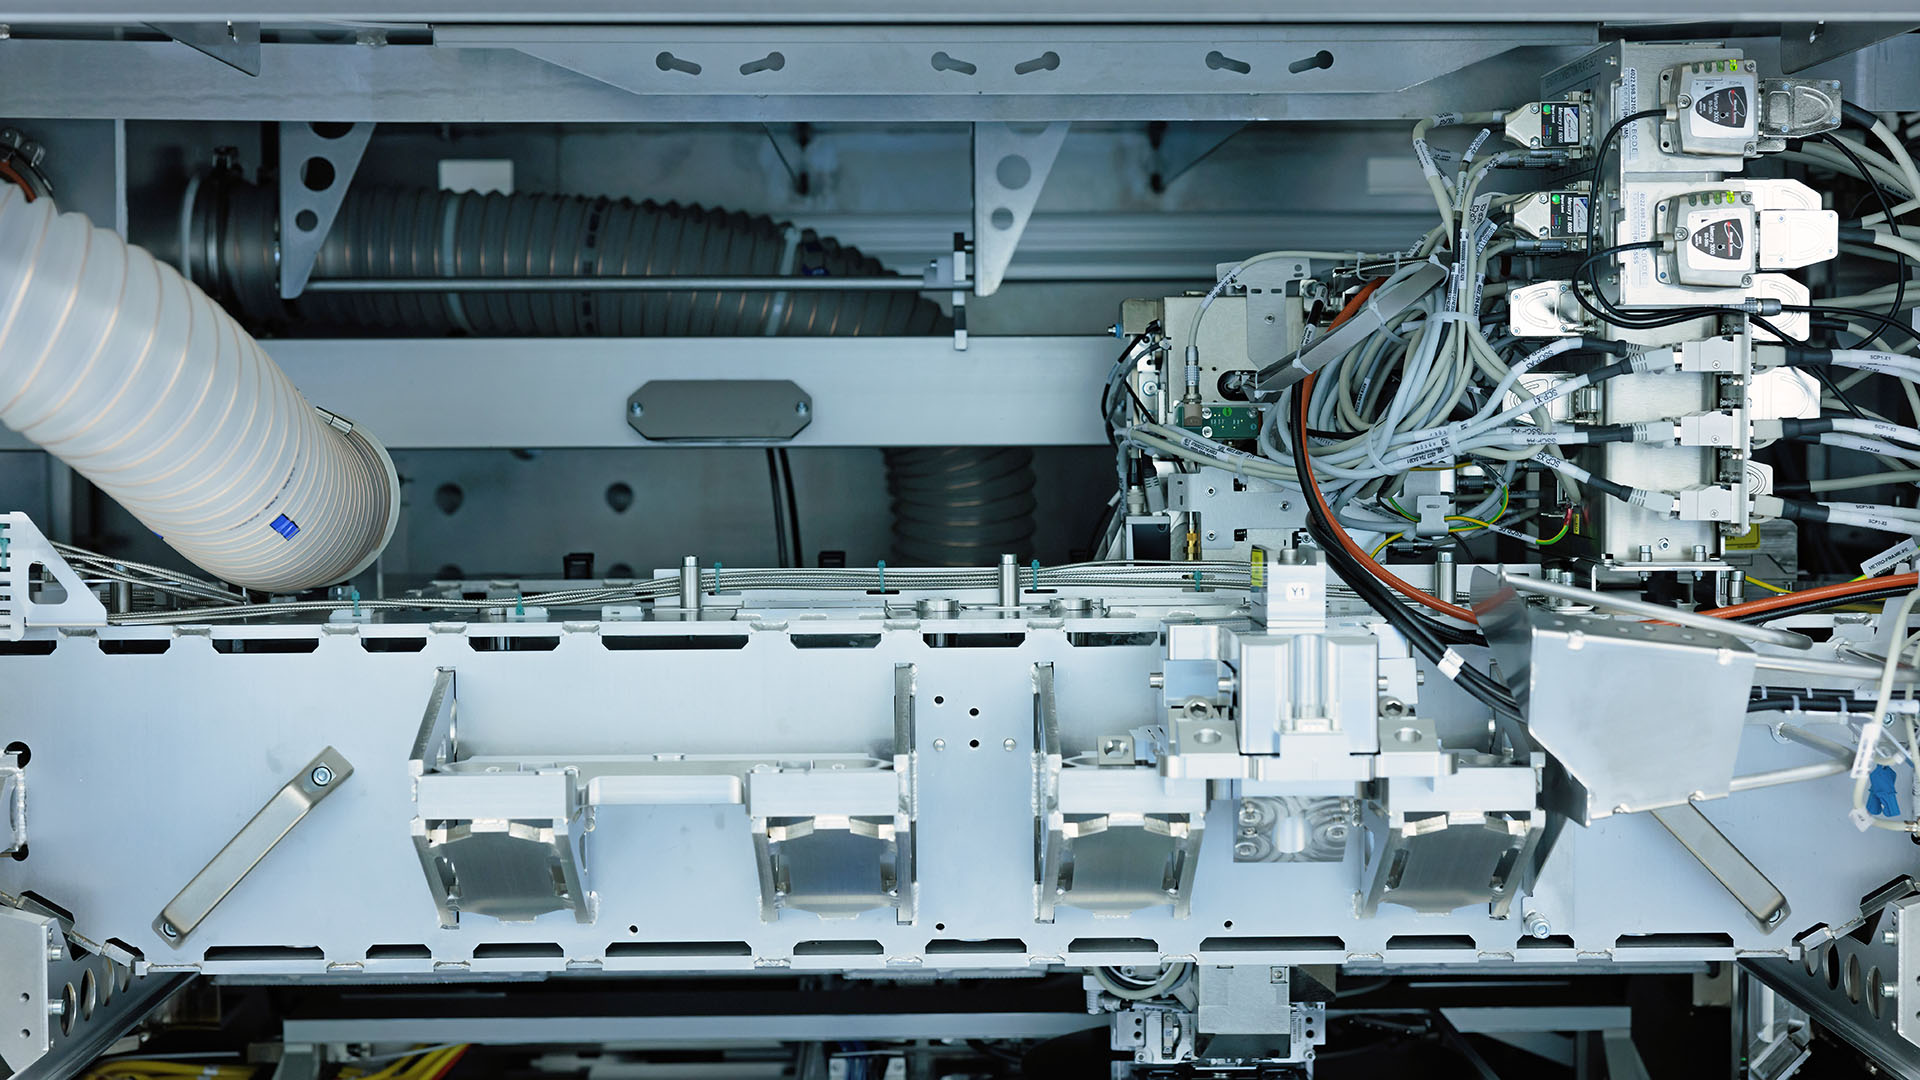 Interior view of ASML's YieldStar system showcasing the intricate machinery and circuitry. 